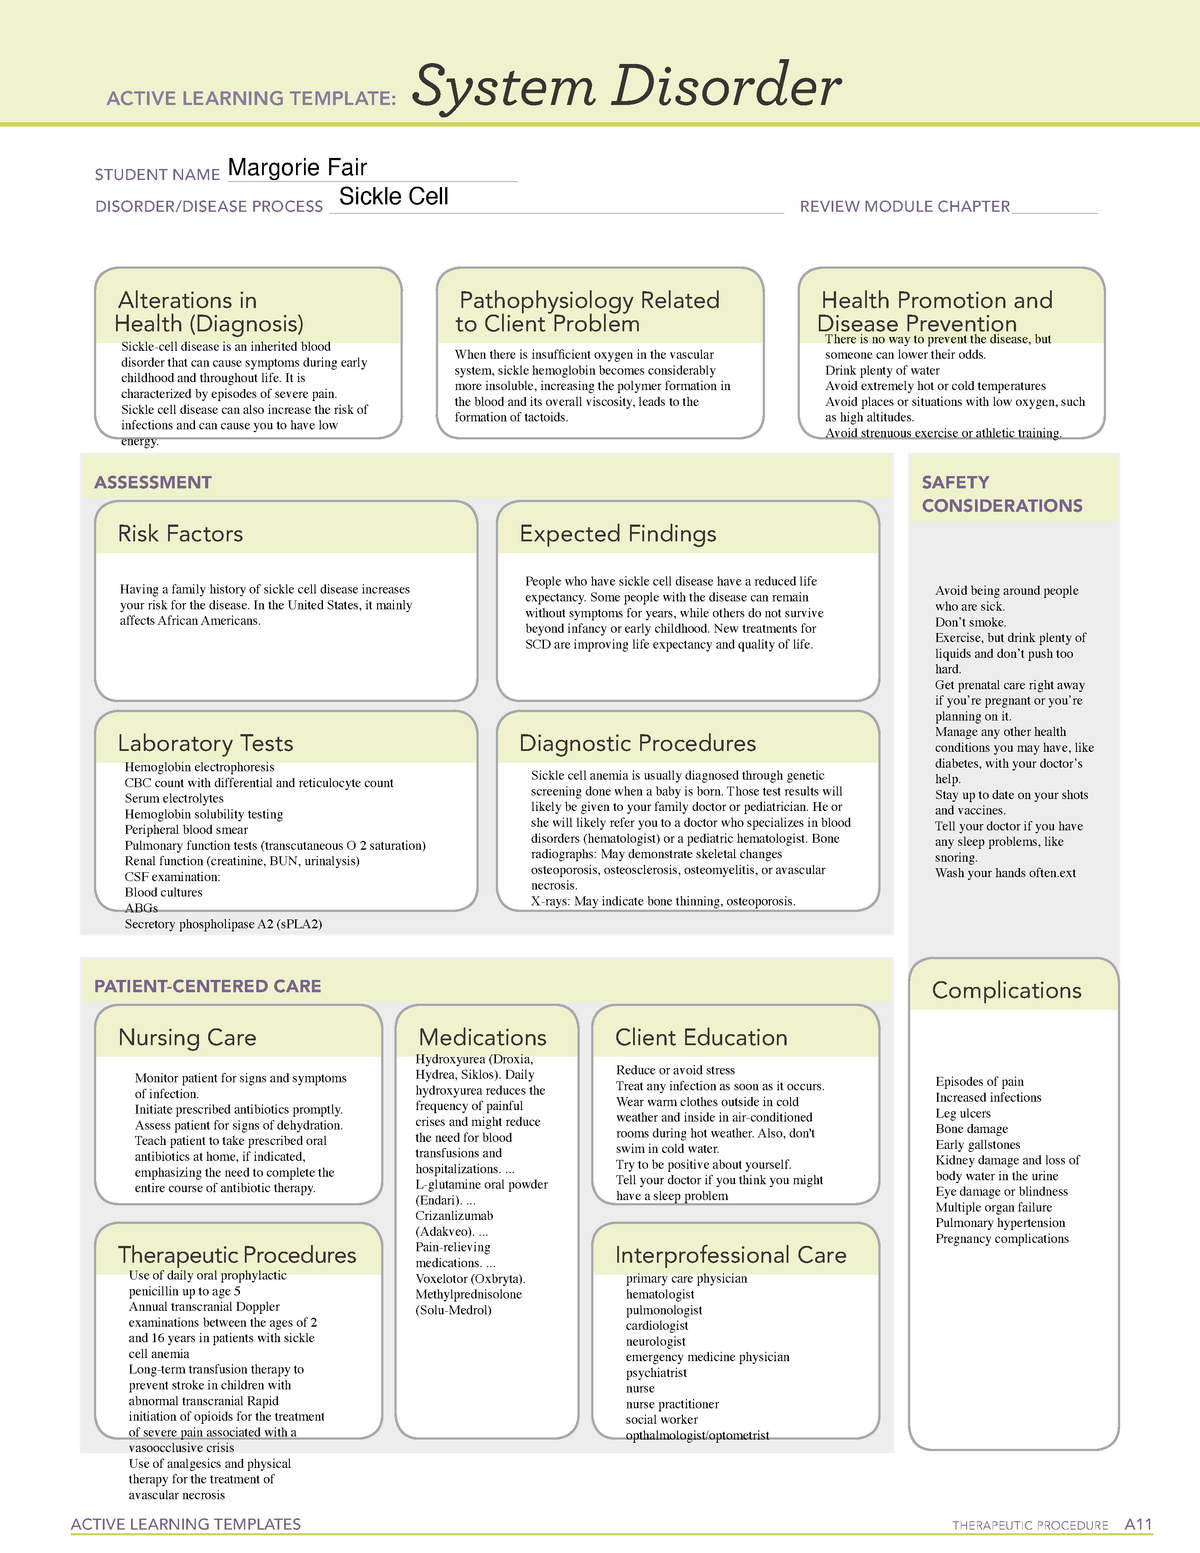 ATI Sickle Cell System Disorder template ACTIVE LEARNING TEMPLATES